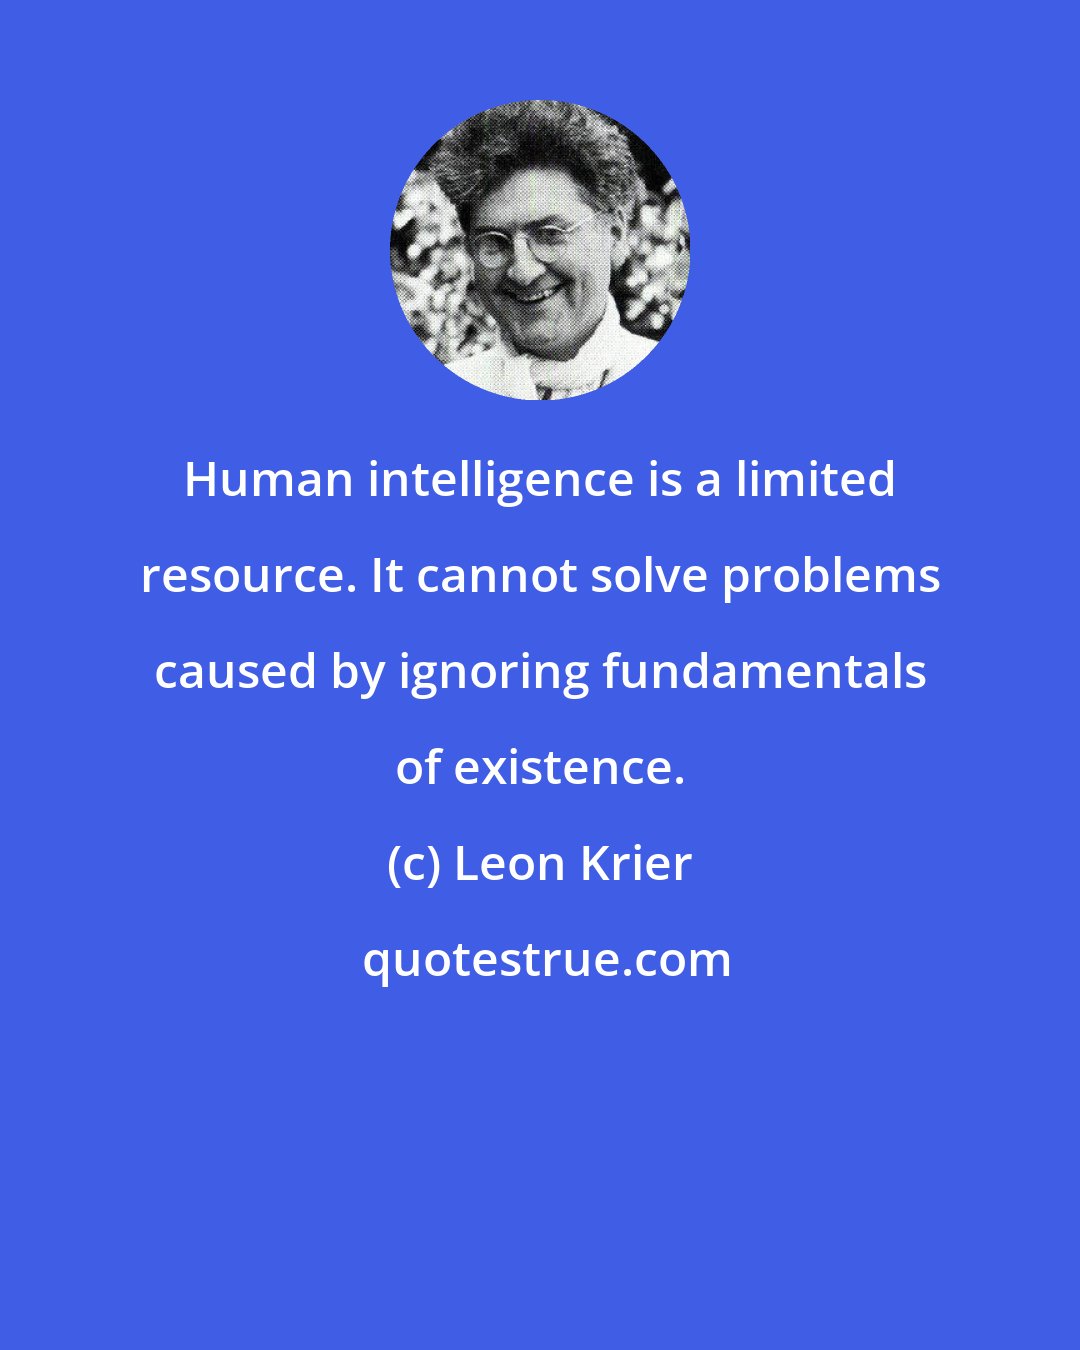 Leon Krier: Human intelligence is a limited resource. It cannot solve problems caused by ignoring fundamentals of existence.